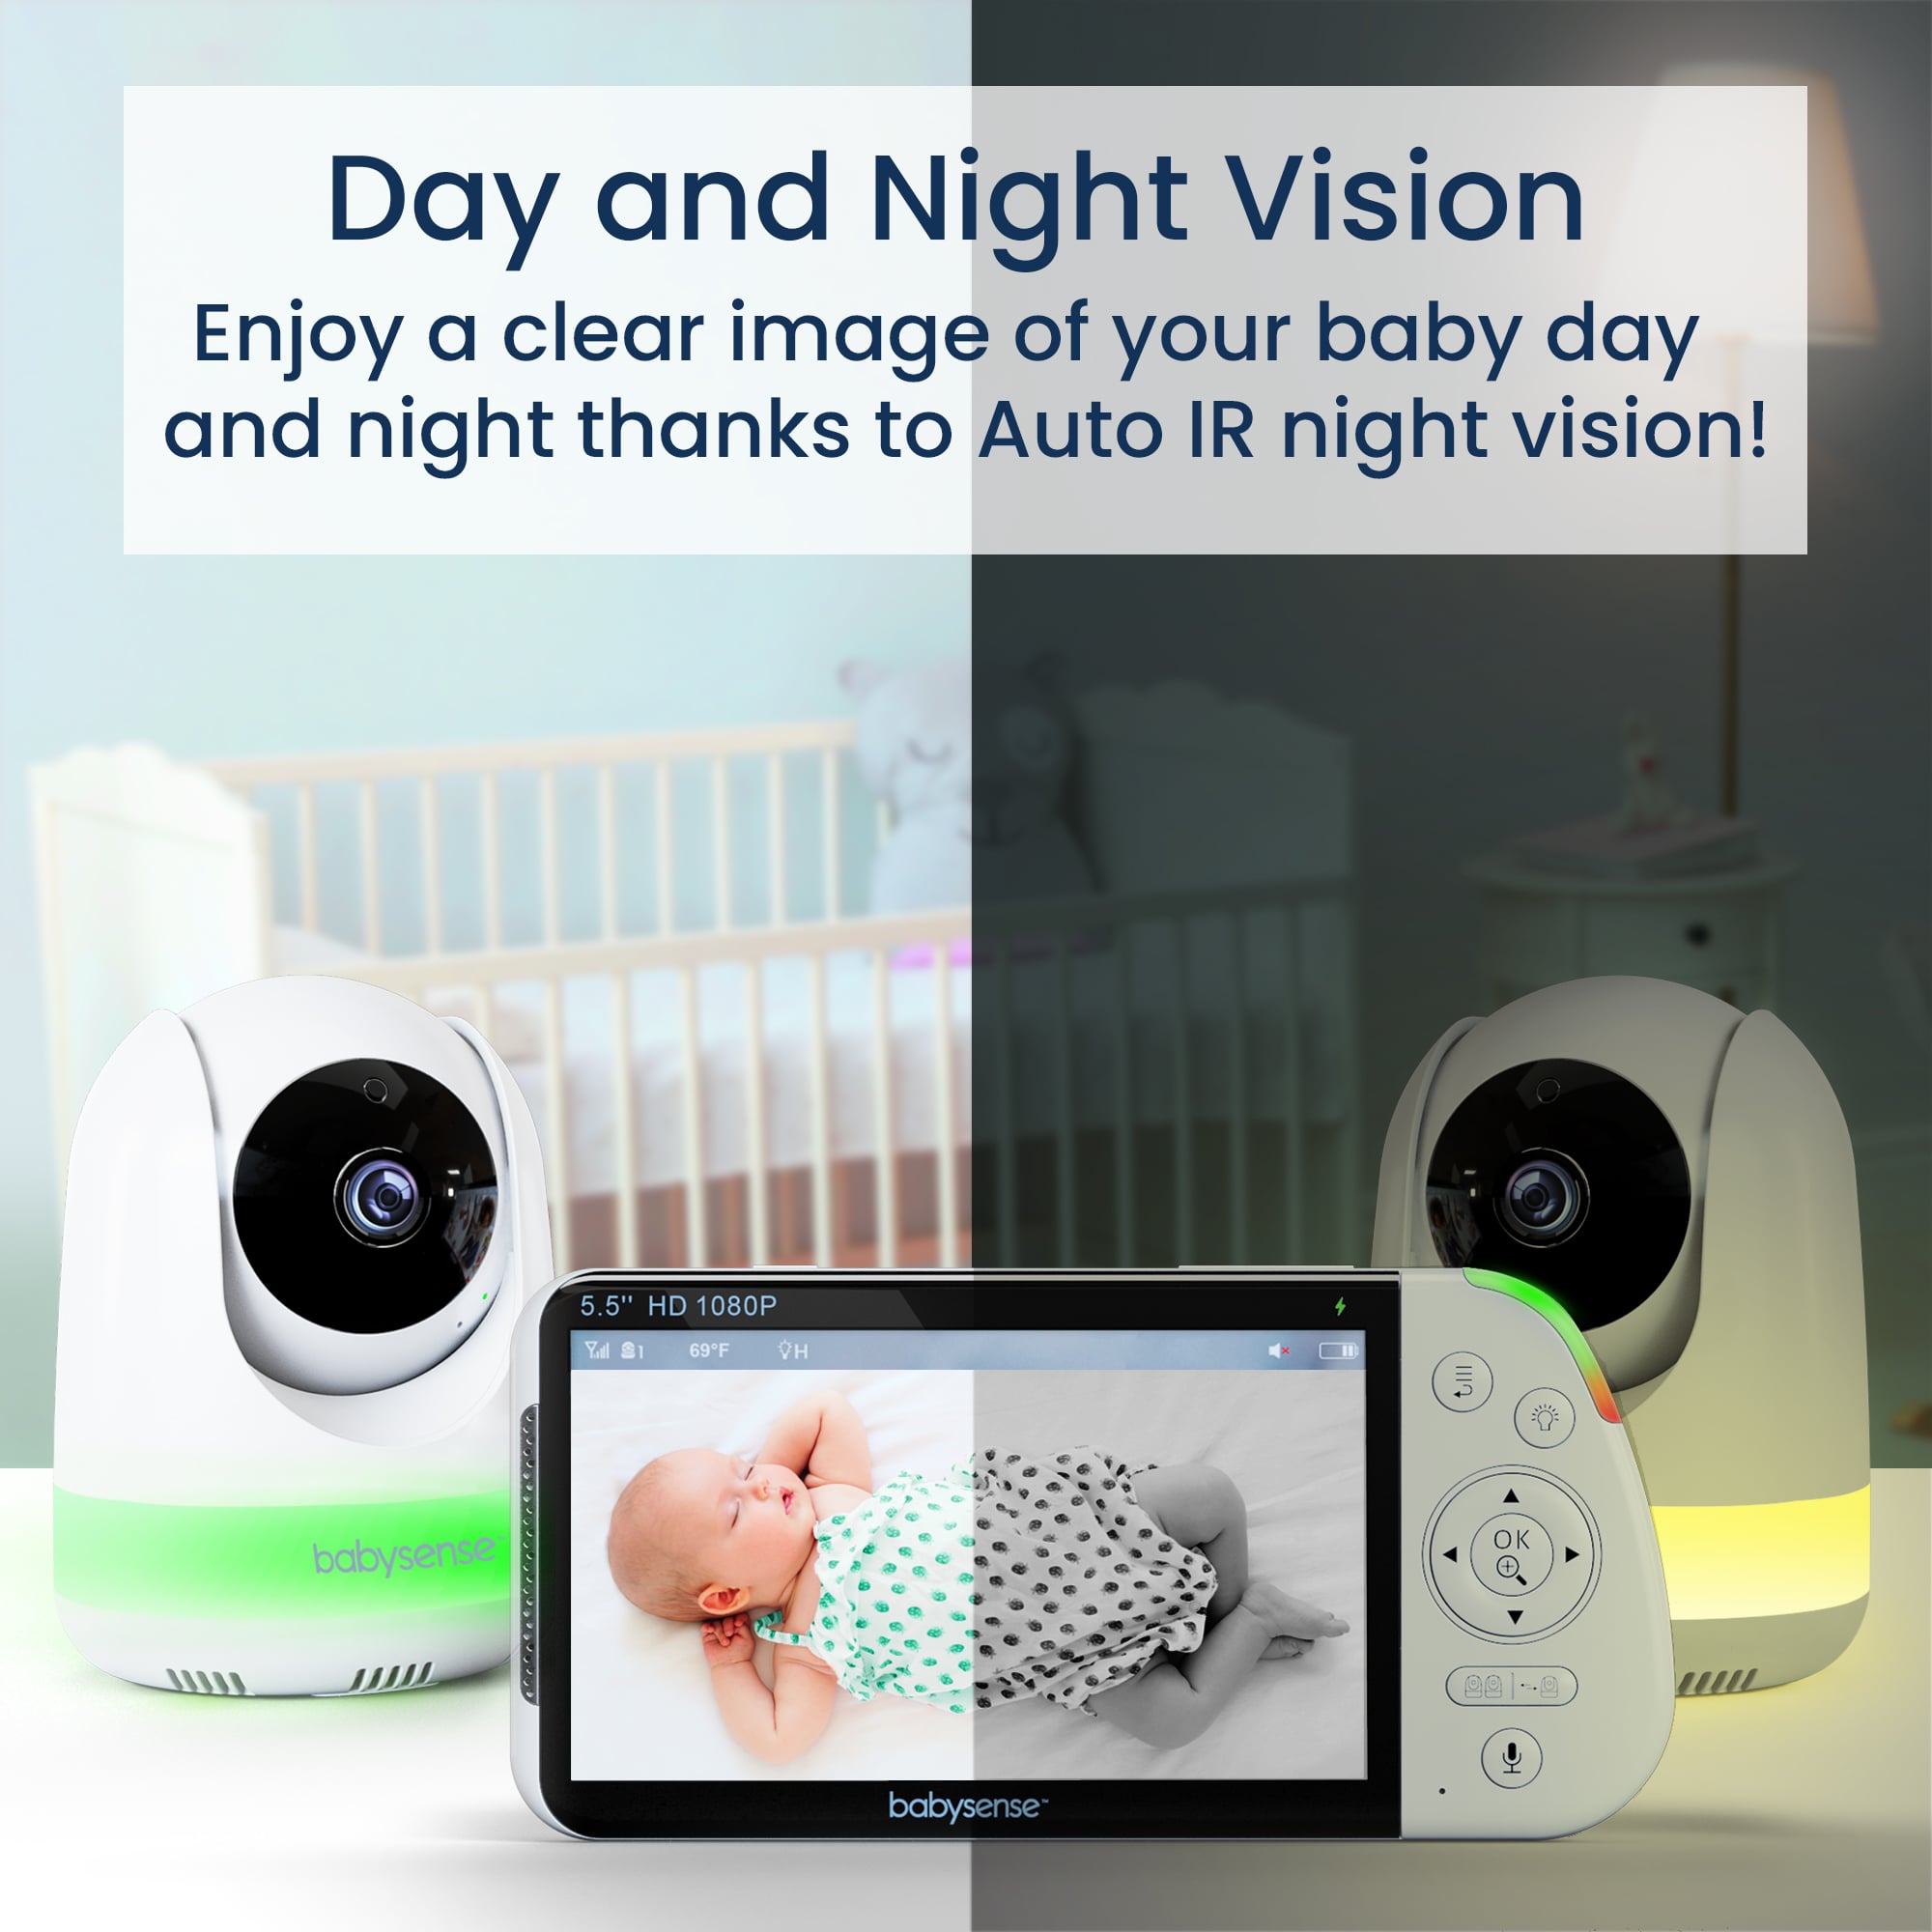 Maxview Baby Monitor 5.5 Inch 1080p Full HD, White Noise, Split-Screen with 2 Cameras